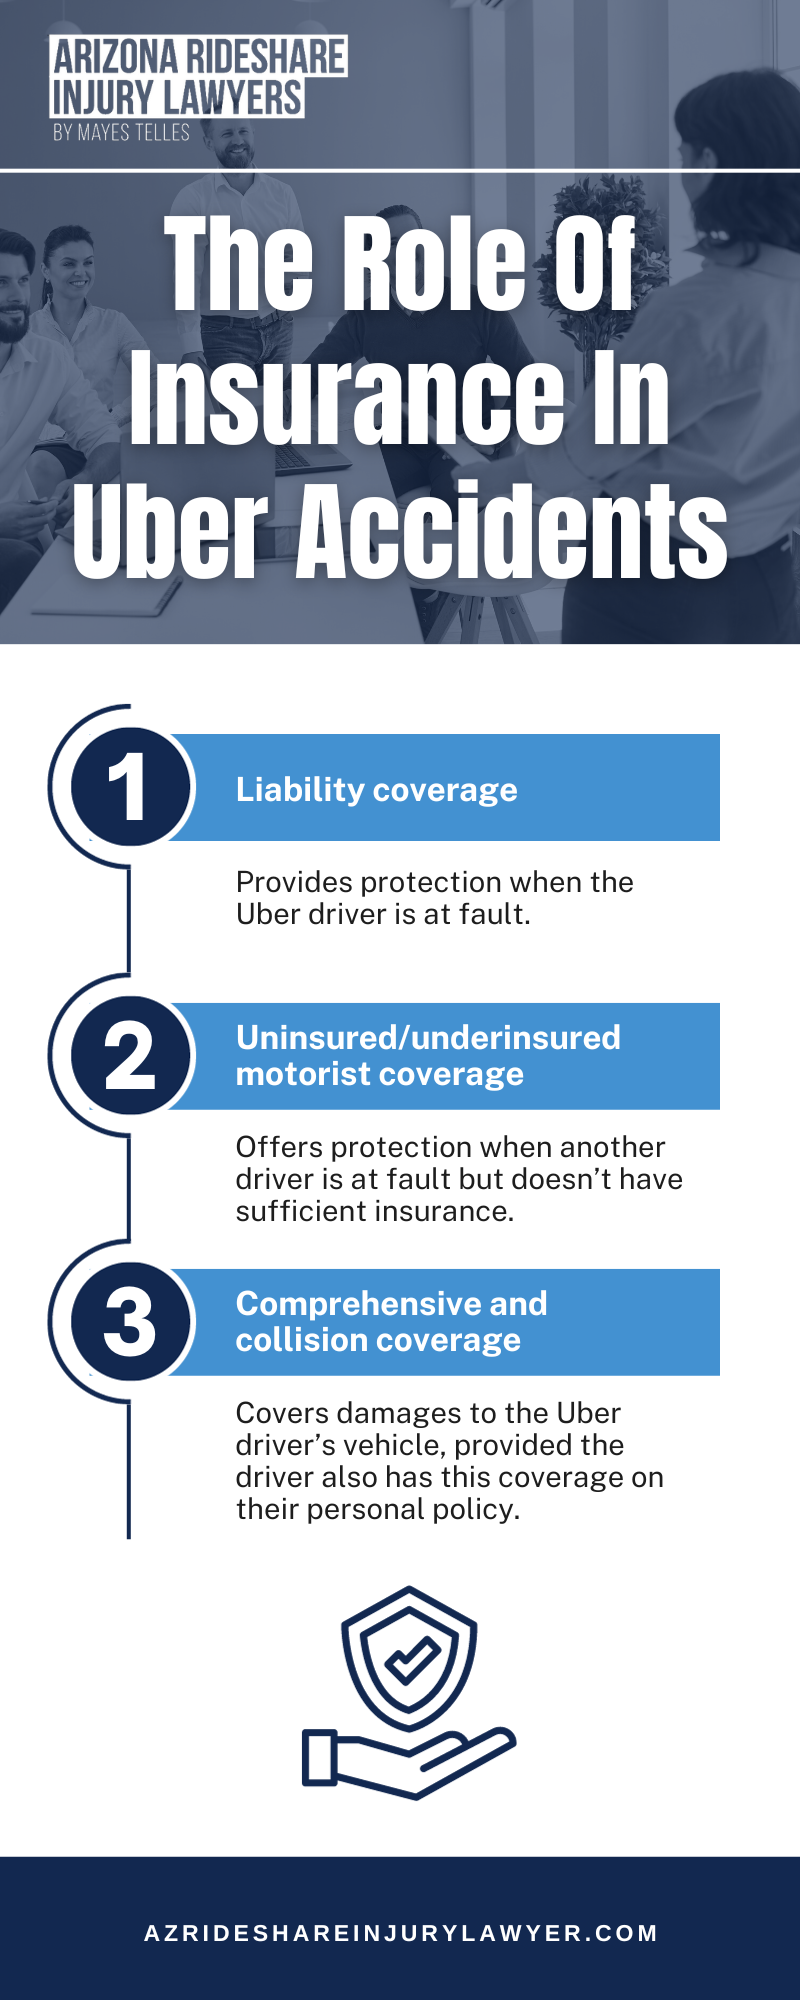 The Role Of Insurance In Uber Accidents Infographic